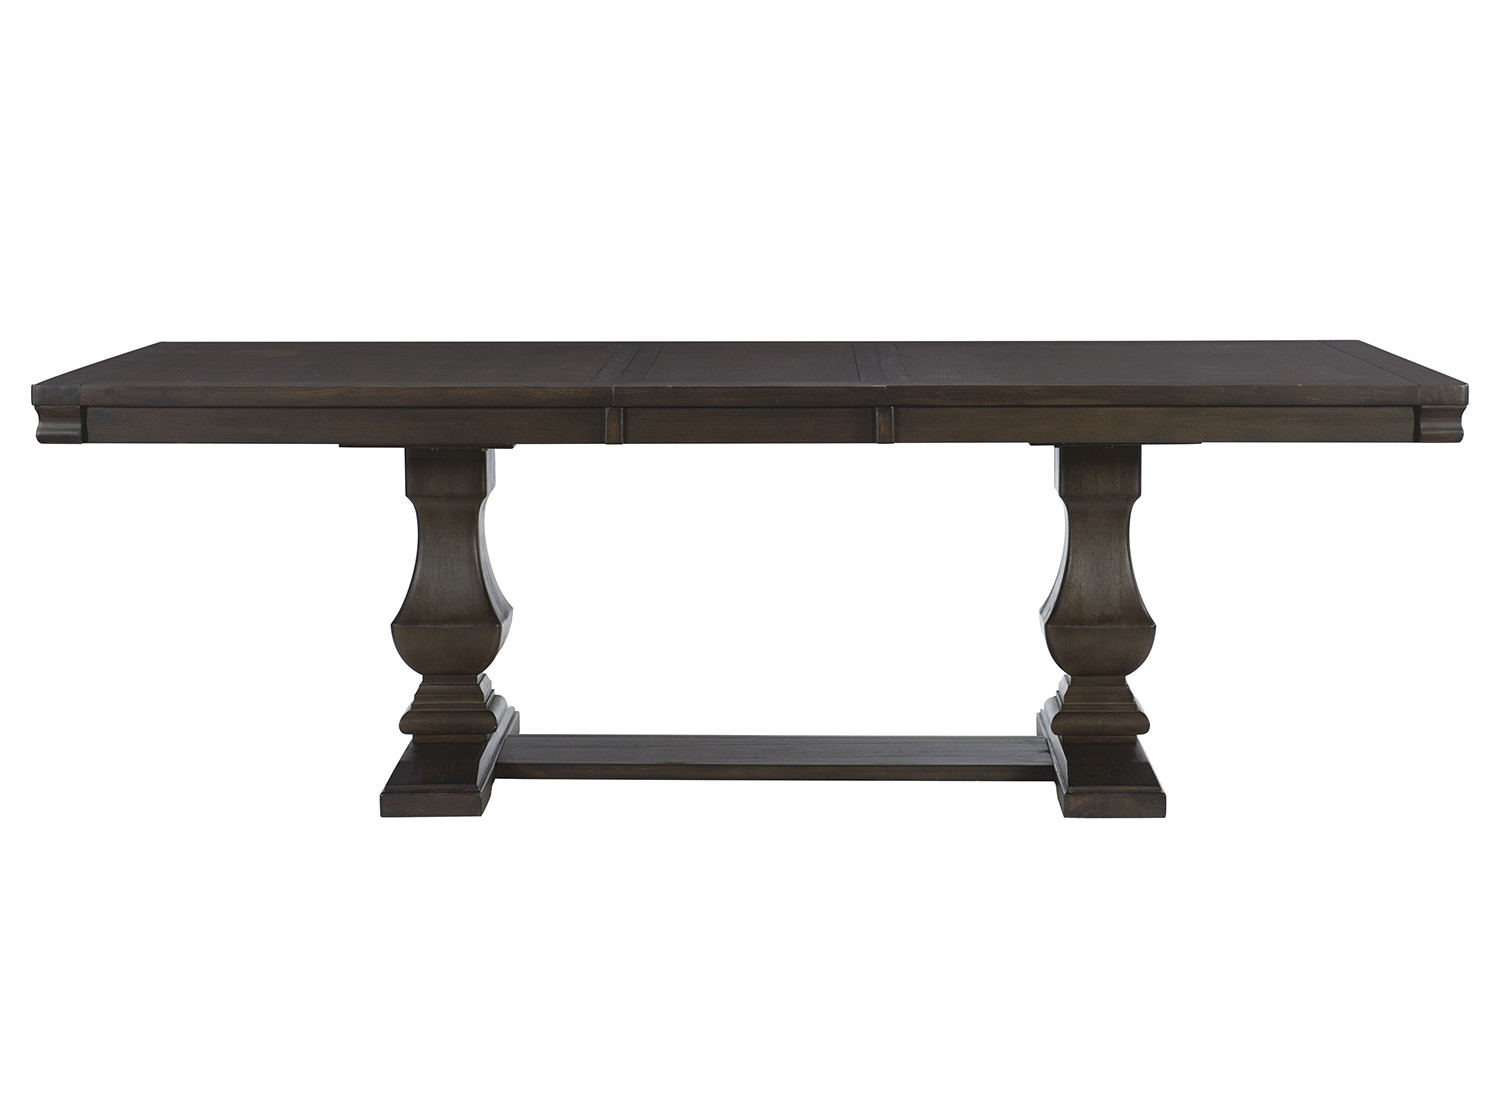 Homelegance Southlake Dining Table - Wire-brushed Rustic Brown